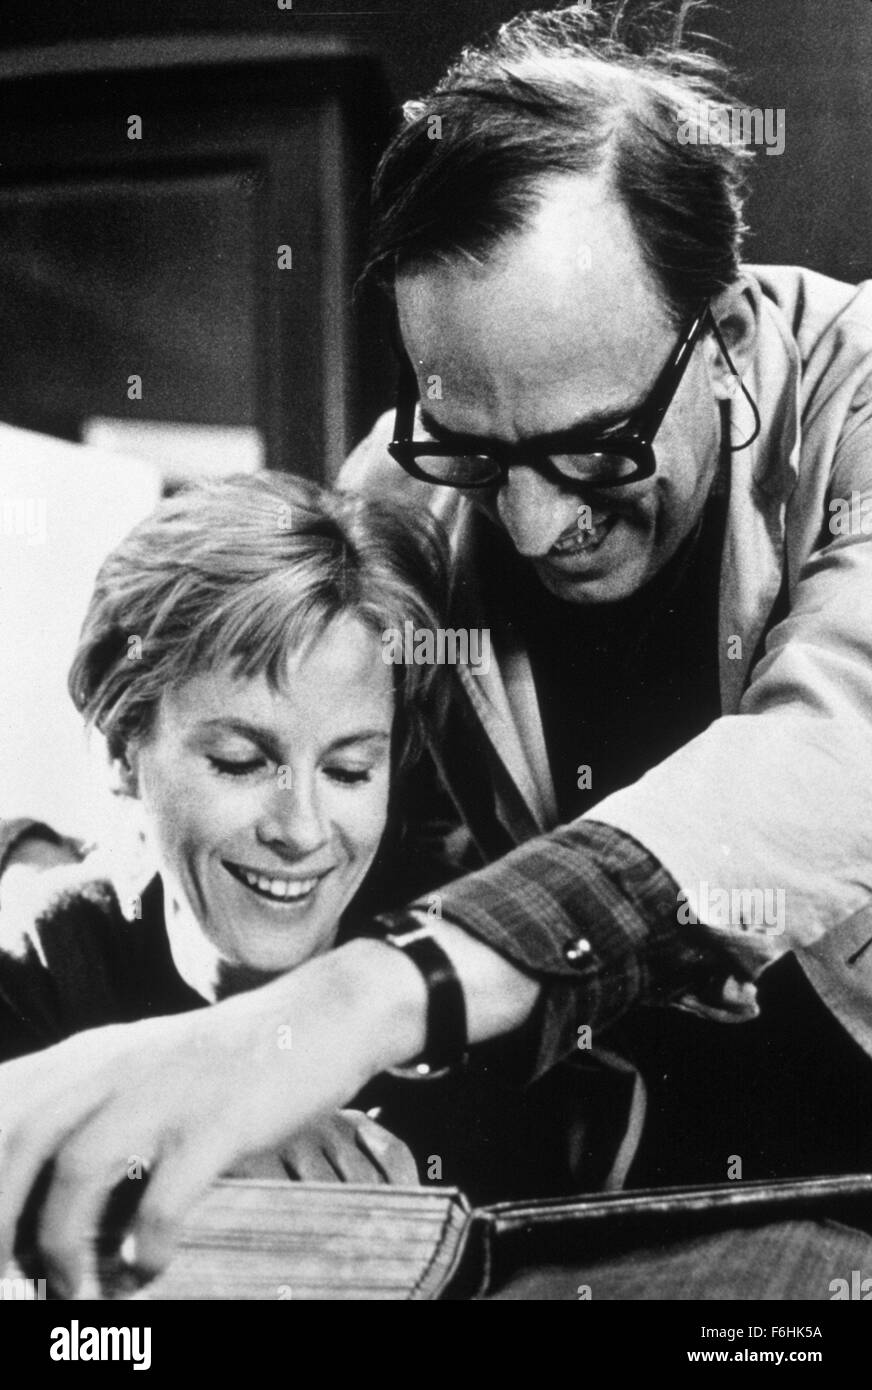 1971, Film Title: TOUCH, Director: INGMAR BERGMAN, Pictured: BIBI ANDERSSON.  (Credit Image: SNAP Stock Photo - Alamy